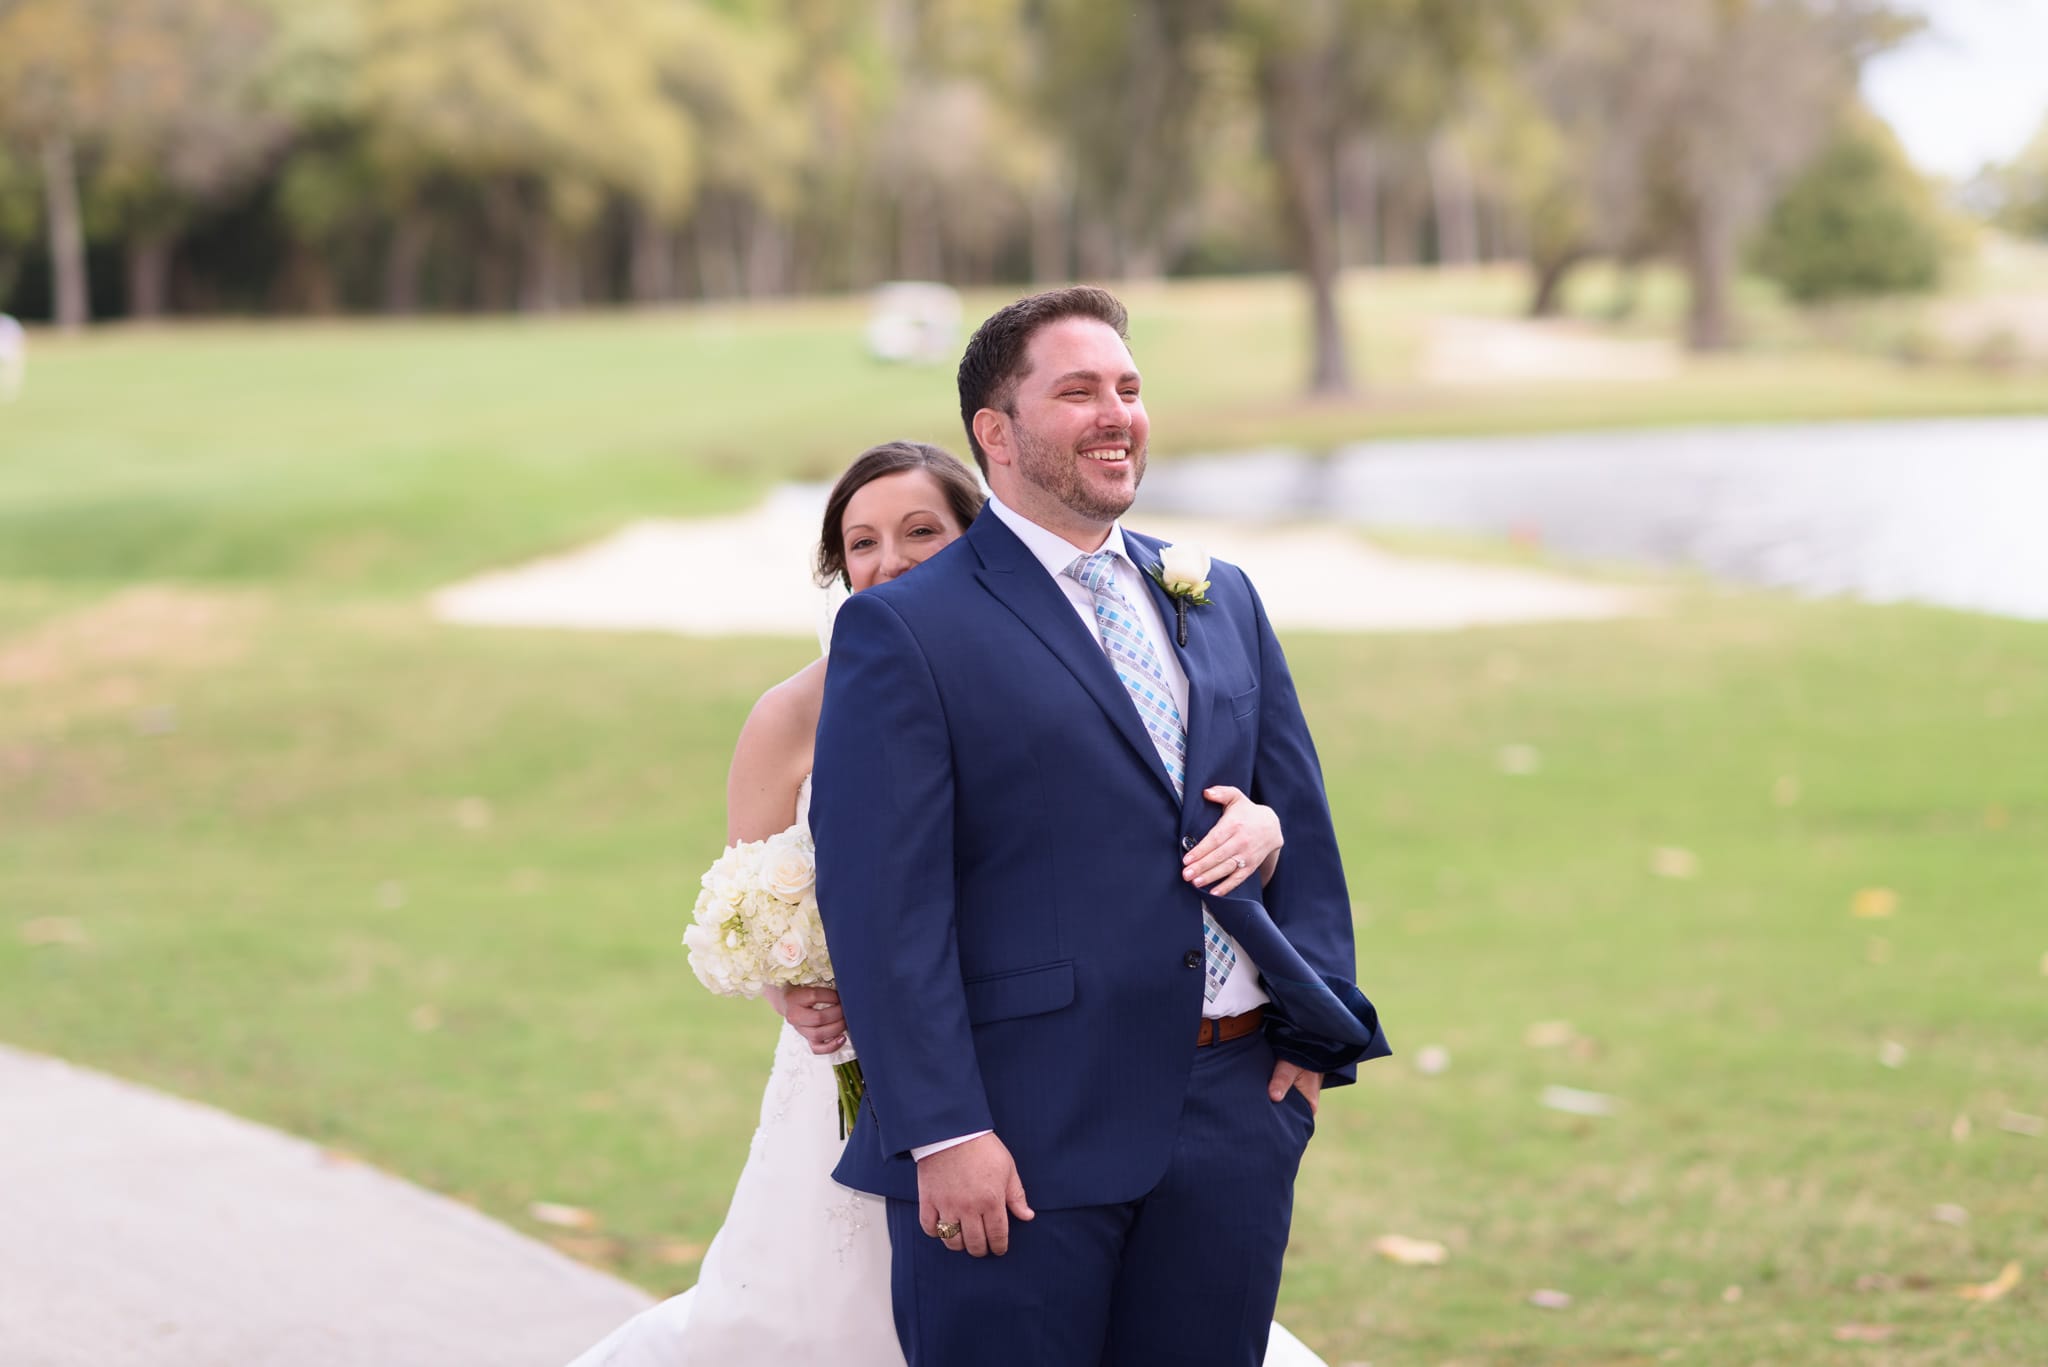 First look with bride and groom on golfcourse - Pawleys Plantation